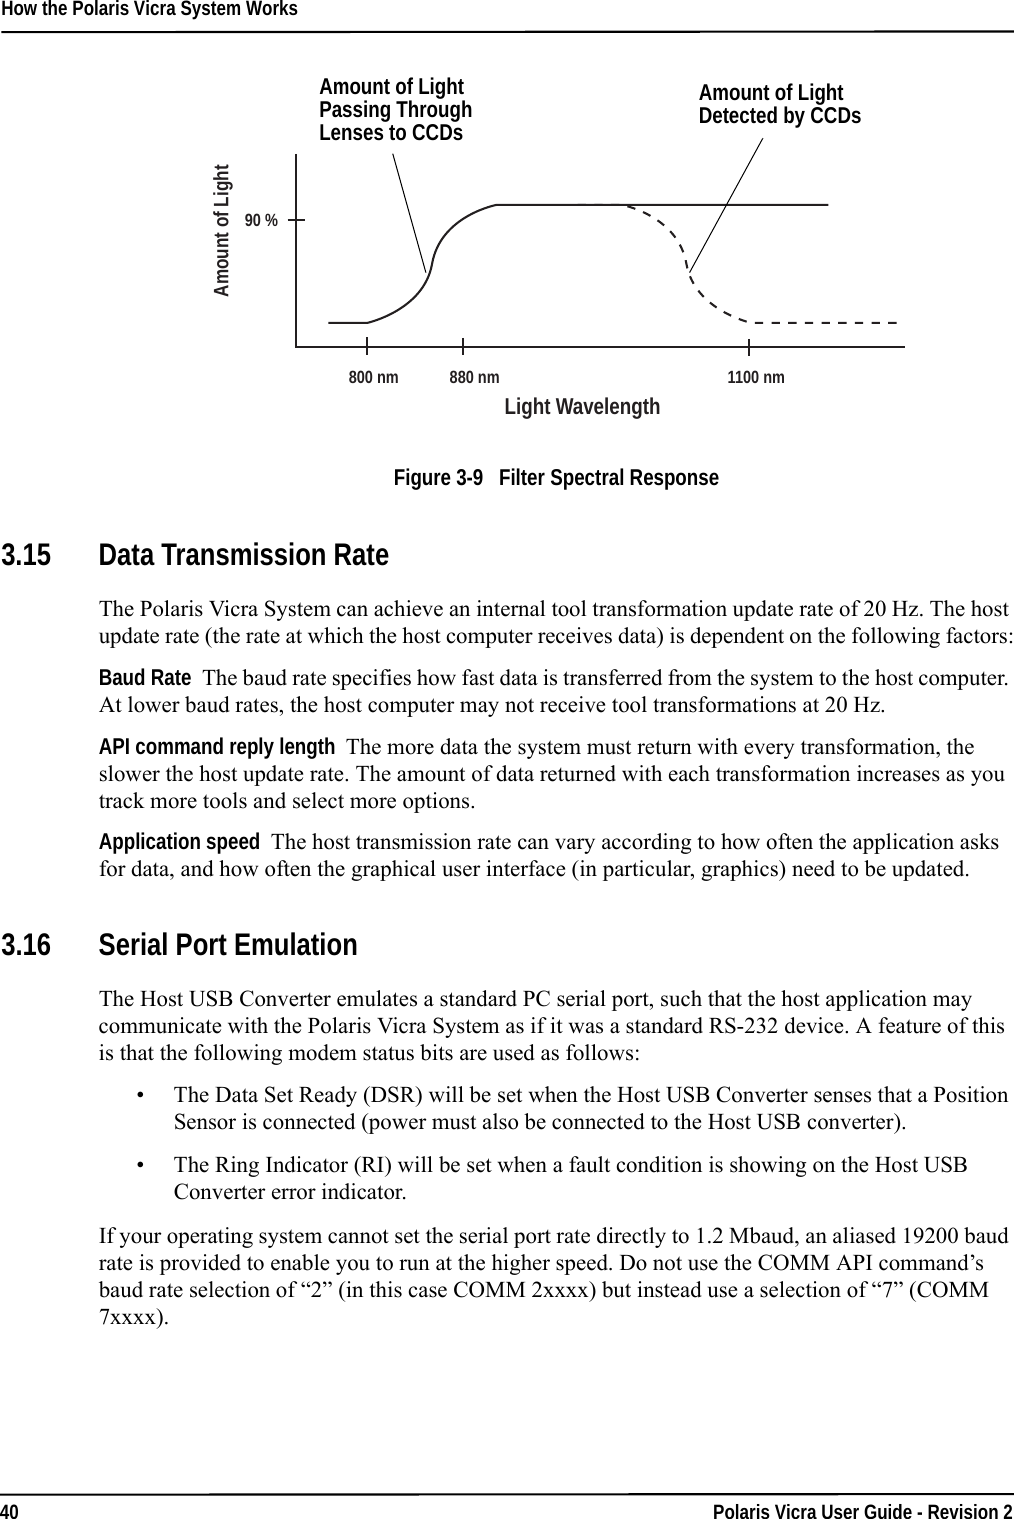 How the Polaris Vicra System Works40 Polaris Vicra User Guide - Revision 2Figure 3-9   Filter Spectral Response3.15 Data Transmission RateThe Polaris Vicra System can achieve an internal tool transformation update rate of 20 Hz. The host update rate (the rate at which the host computer receives data) is dependent on the following factors:Baud Rate  The baud rate specifies how fast data is transferred from the system to the host computer. At lower baud rates, the host computer may not receive tool transformations at 20 Hz.API command reply length  The more data the system must return with every transformation, the slower the host update rate. The amount of data returned with each transformation increases as you track more tools and select more options.Application speed  The host transmission rate can vary according to how often the application asks for data, and how often the graphical user interface (in particular, graphics) need to be updated.3.16 Serial Port EmulationThe Host USB Converter emulates a standard PC serial port, such that the host application may communicate with the Polaris Vicra System as if it was a standard RS-232 device. A feature of this is that the following modem status bits are used as follows:• The Data Set Ready (DSR) will be set when the Host USB Converter senses that a Position Sensor is connected (power must also be connected to the Host USB converter).• The Ring Indicator (RI) will be set when a fault condition is showing on the Host USB Converter error indicator. If your operating system cannot set the serial port rate directly to 1.2 Mbaud, an aliased 19200 baud rate is provided to enable you to run at the higher speed. Do not use the COMM API command’s baud rate selection of “2” (in this case COMM 2xxxx) but instead use a selection of “7” (COMM 7xxxx).800 nm 880 nm 1100 nm90 %Light WavelengthAmount of LightAmount of Light Passing Through Lenses to CCDsAmount of Light Detected by CCDs